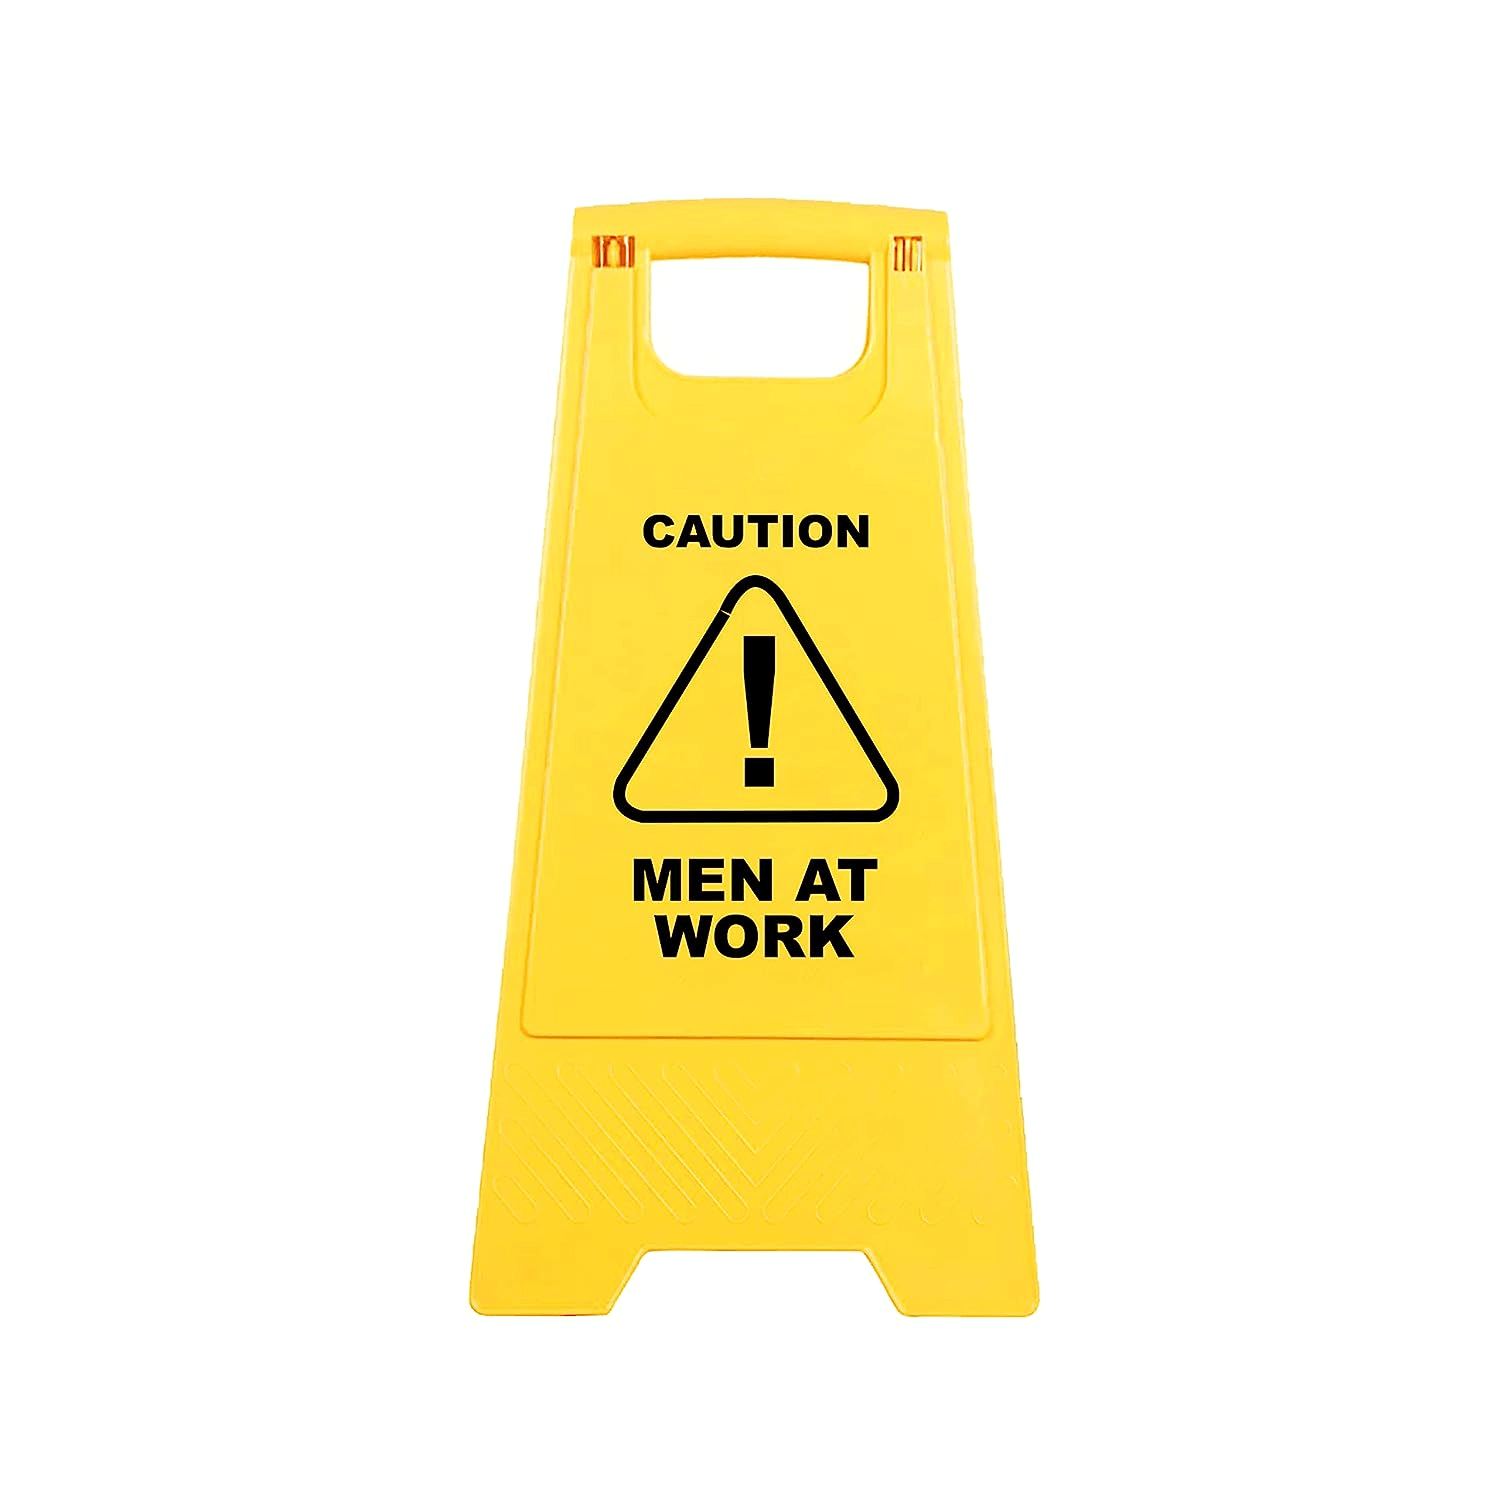 robustt-pp-material-caution-men-at-work-sign-board-uv-resistant-size-62-x-30-cm-two-side-floor-sign-board-pack-of-1